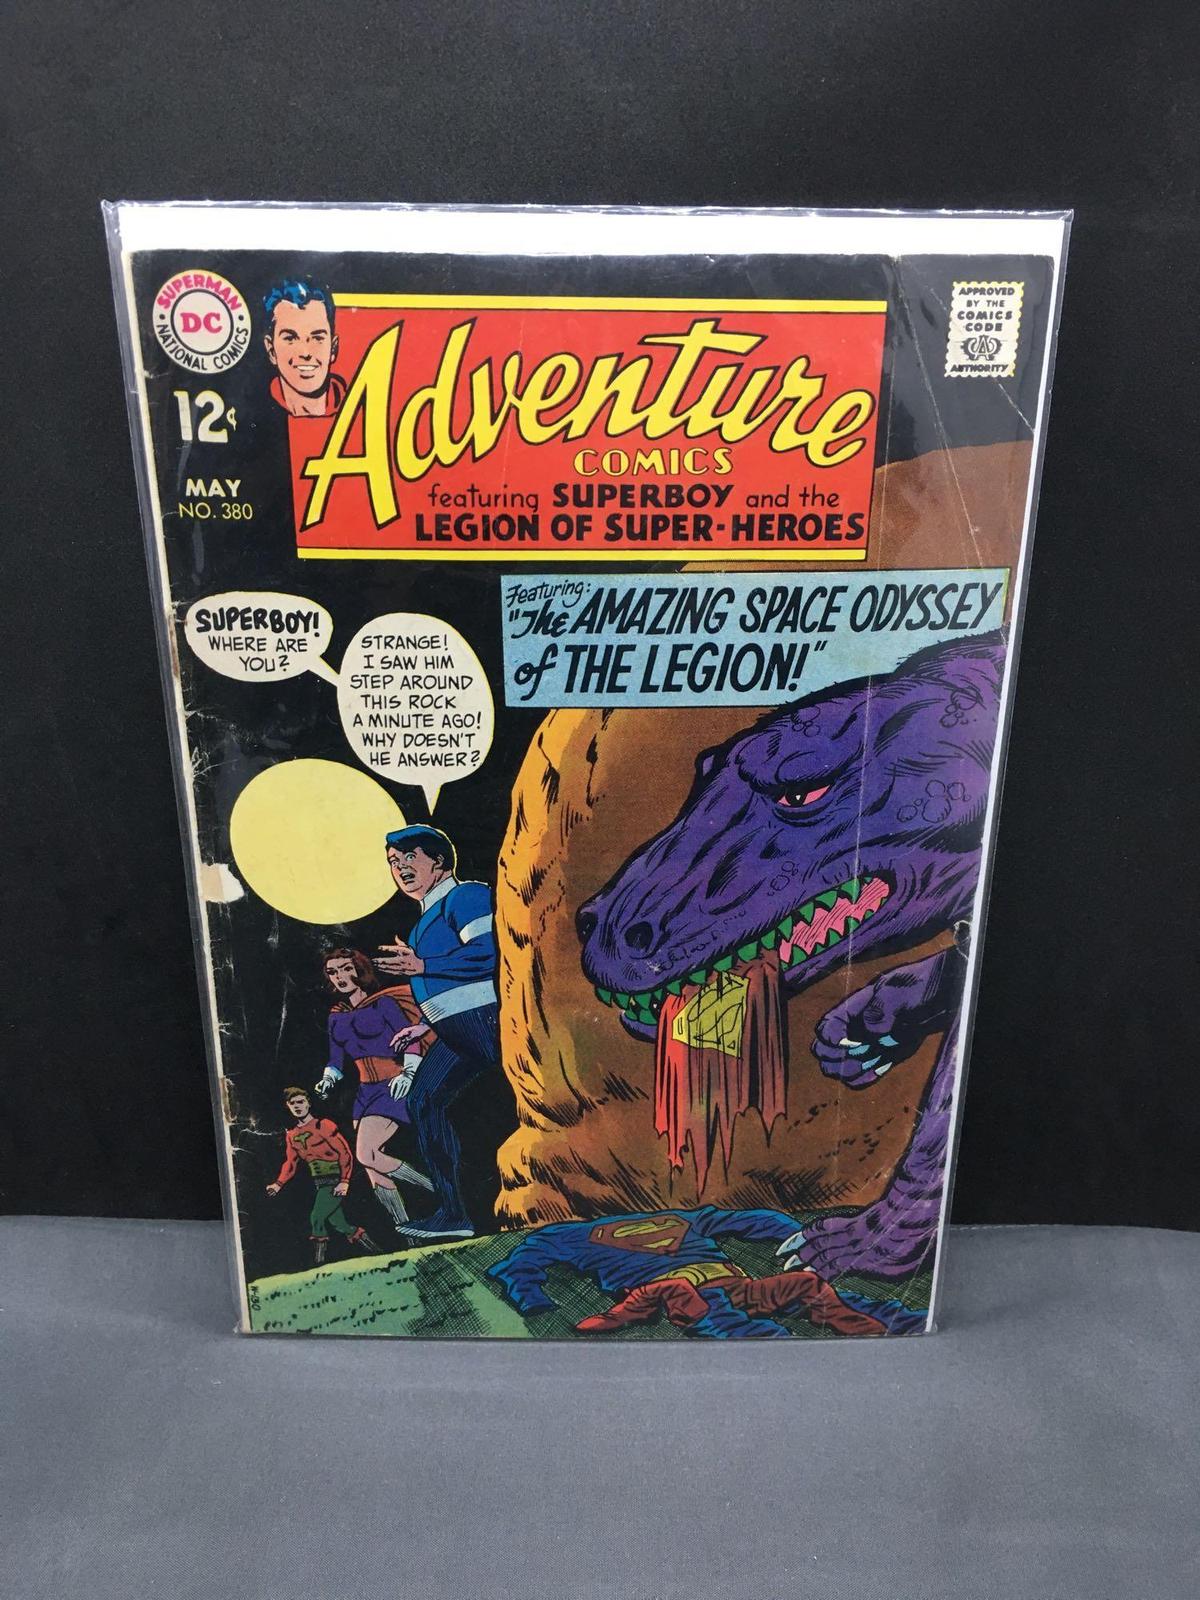 1969 DC Comics ADVENTURE COMICS #380 Silver Age Comic Book from Vintage Collection